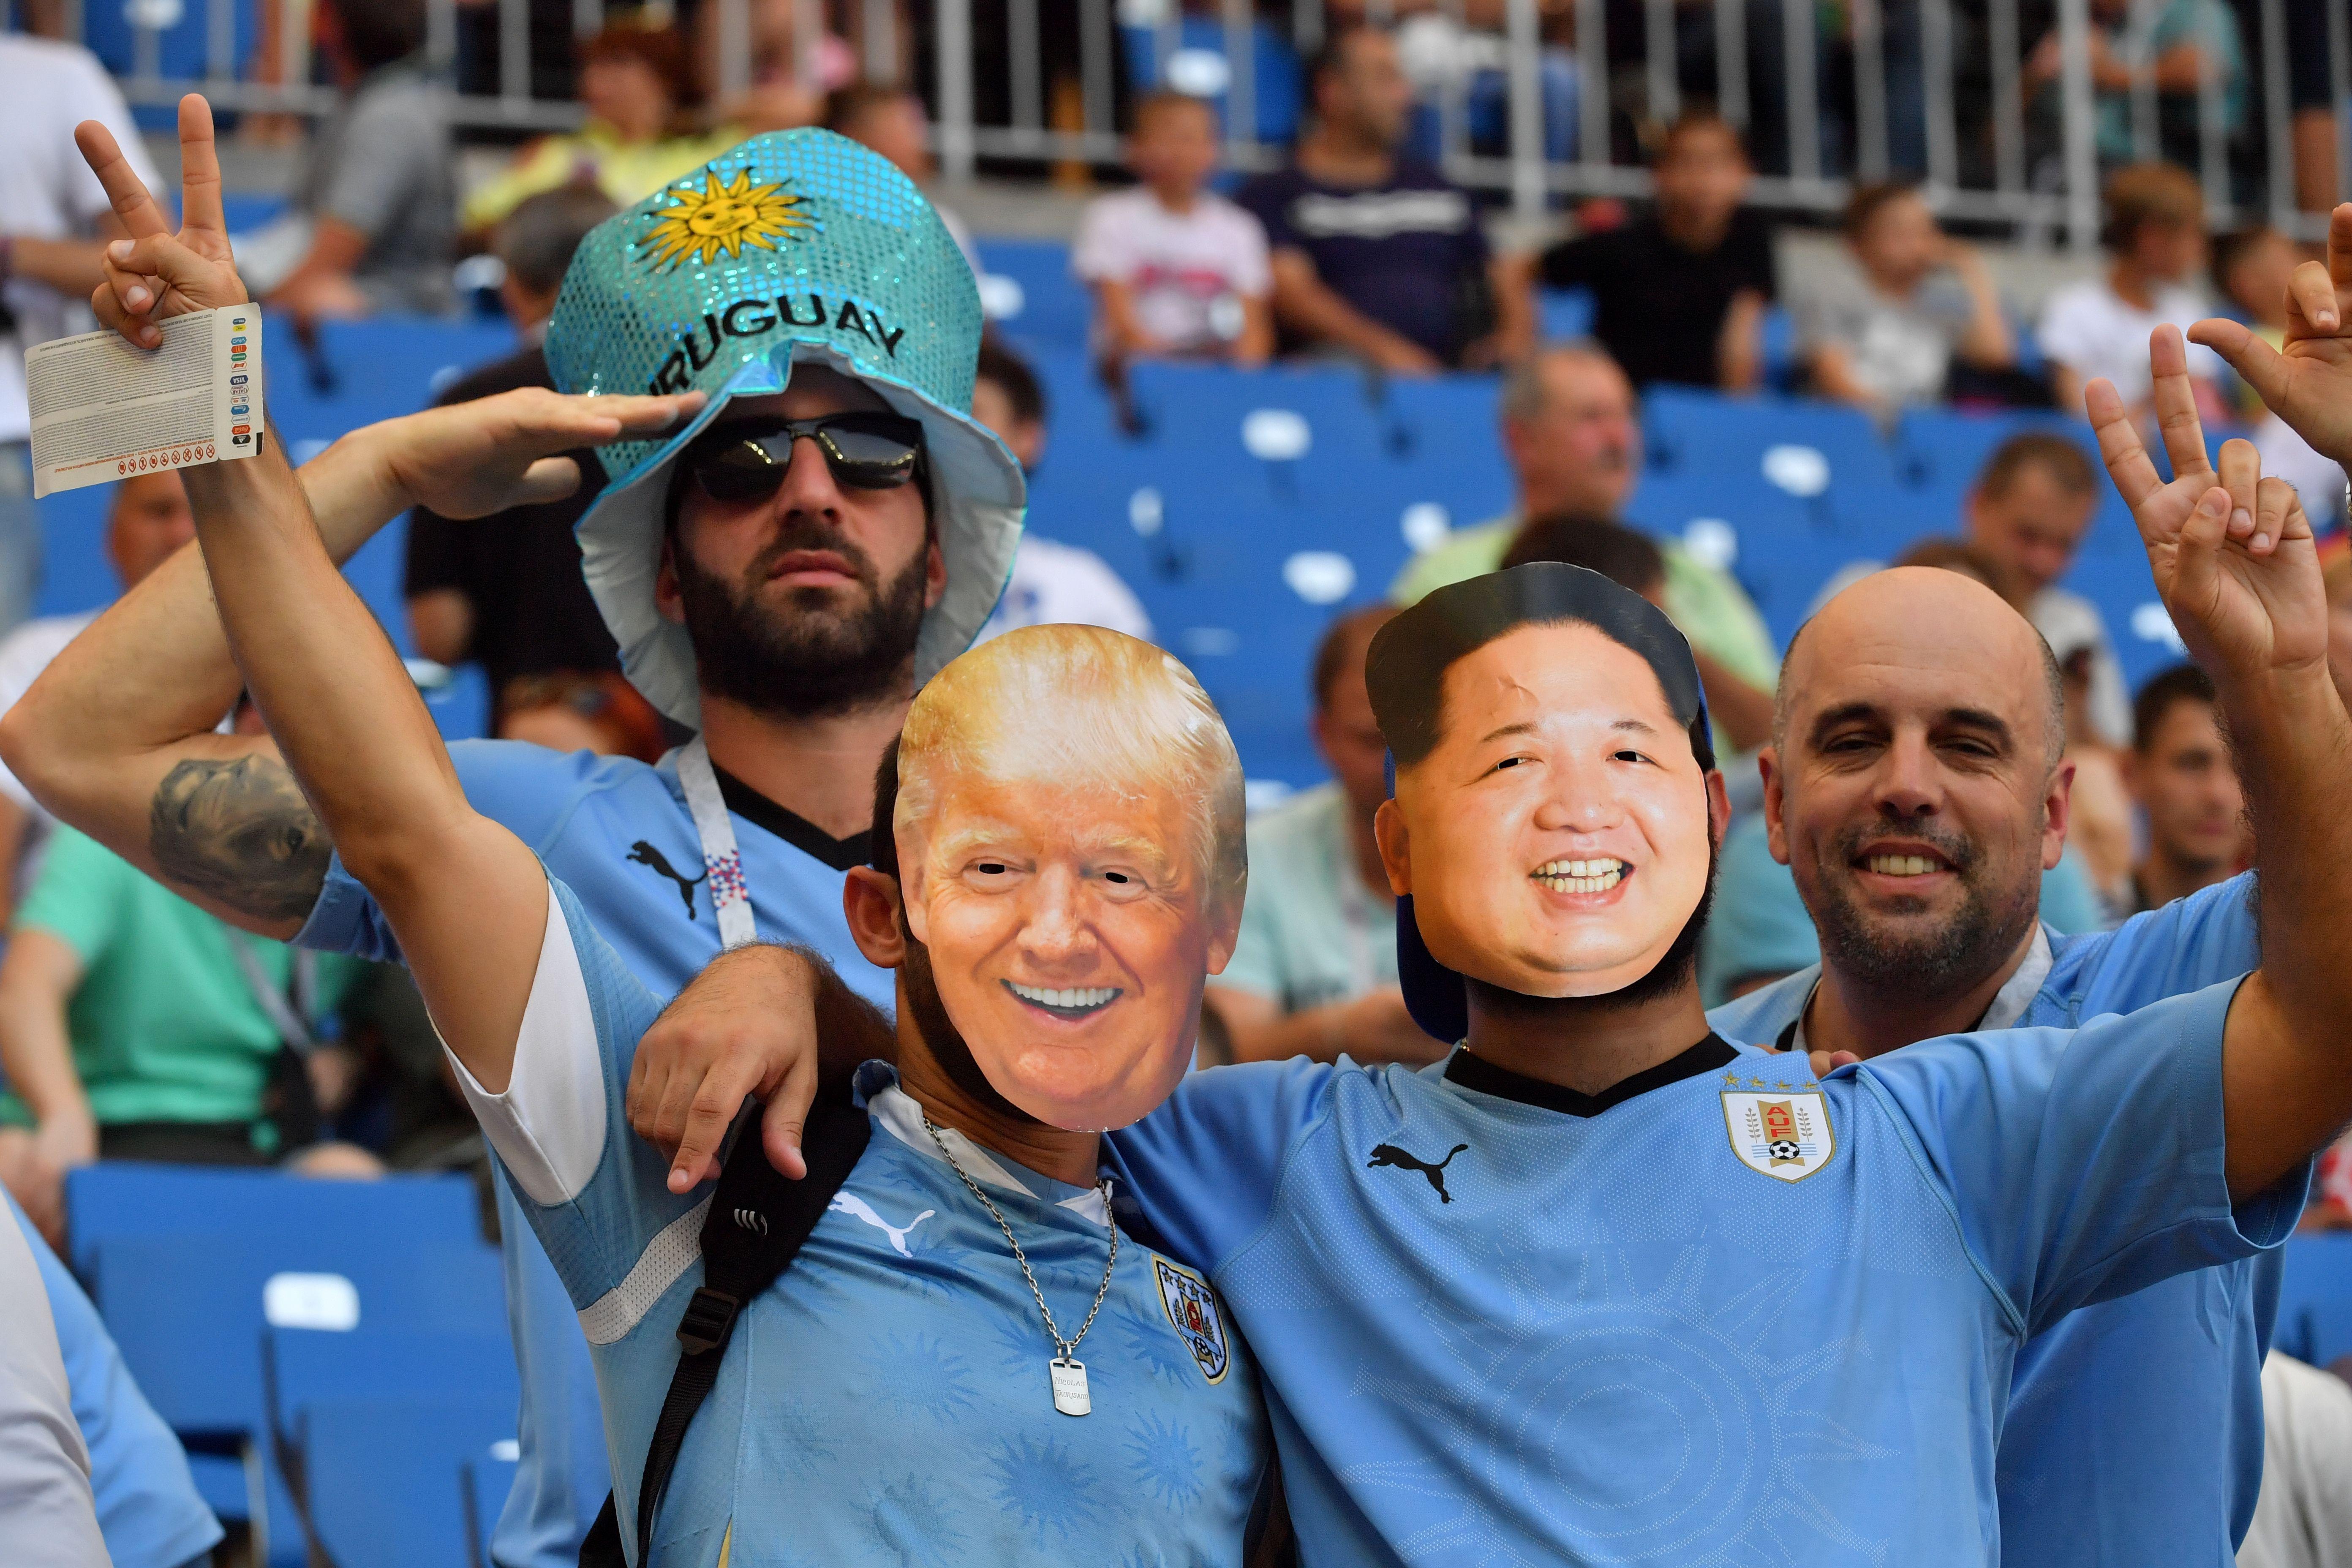 Uruguay fans with paper masks of U.S. President Donald Trump and North Korean leader Kim Jong-un are seen in the crowd ahead of the 2018 World Cup Uruguay–Saudi Arabia match on June 20.